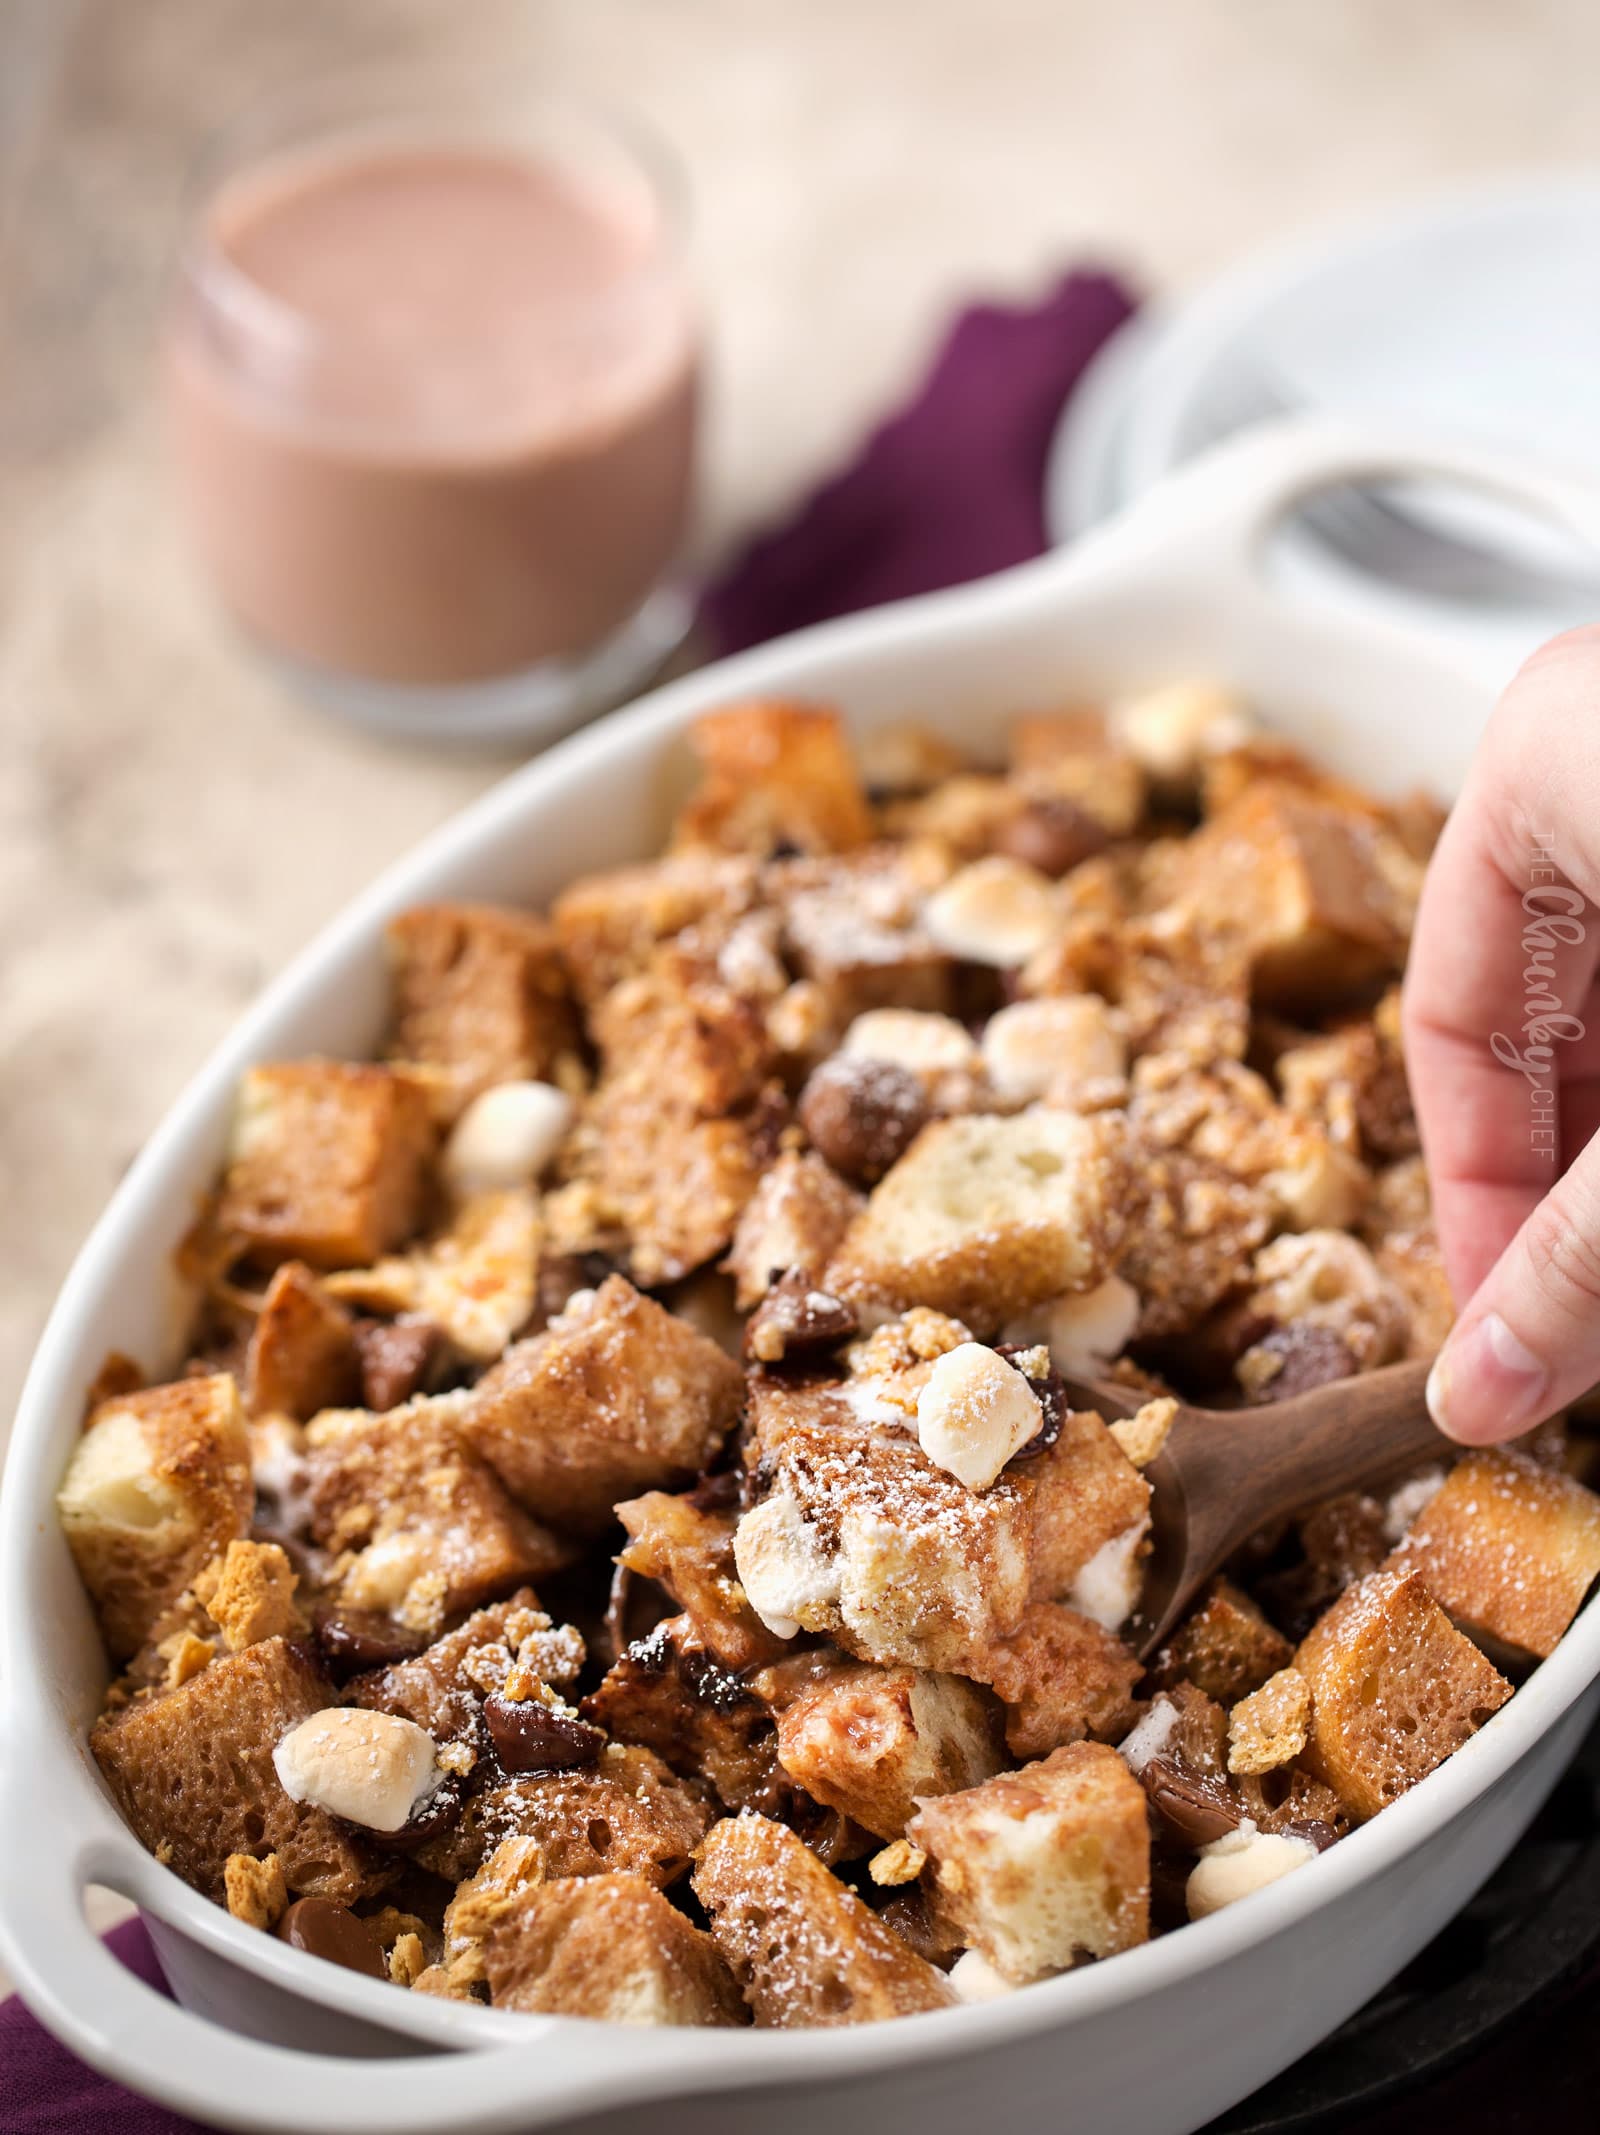 Spoon serving a scoop of French toast casserole